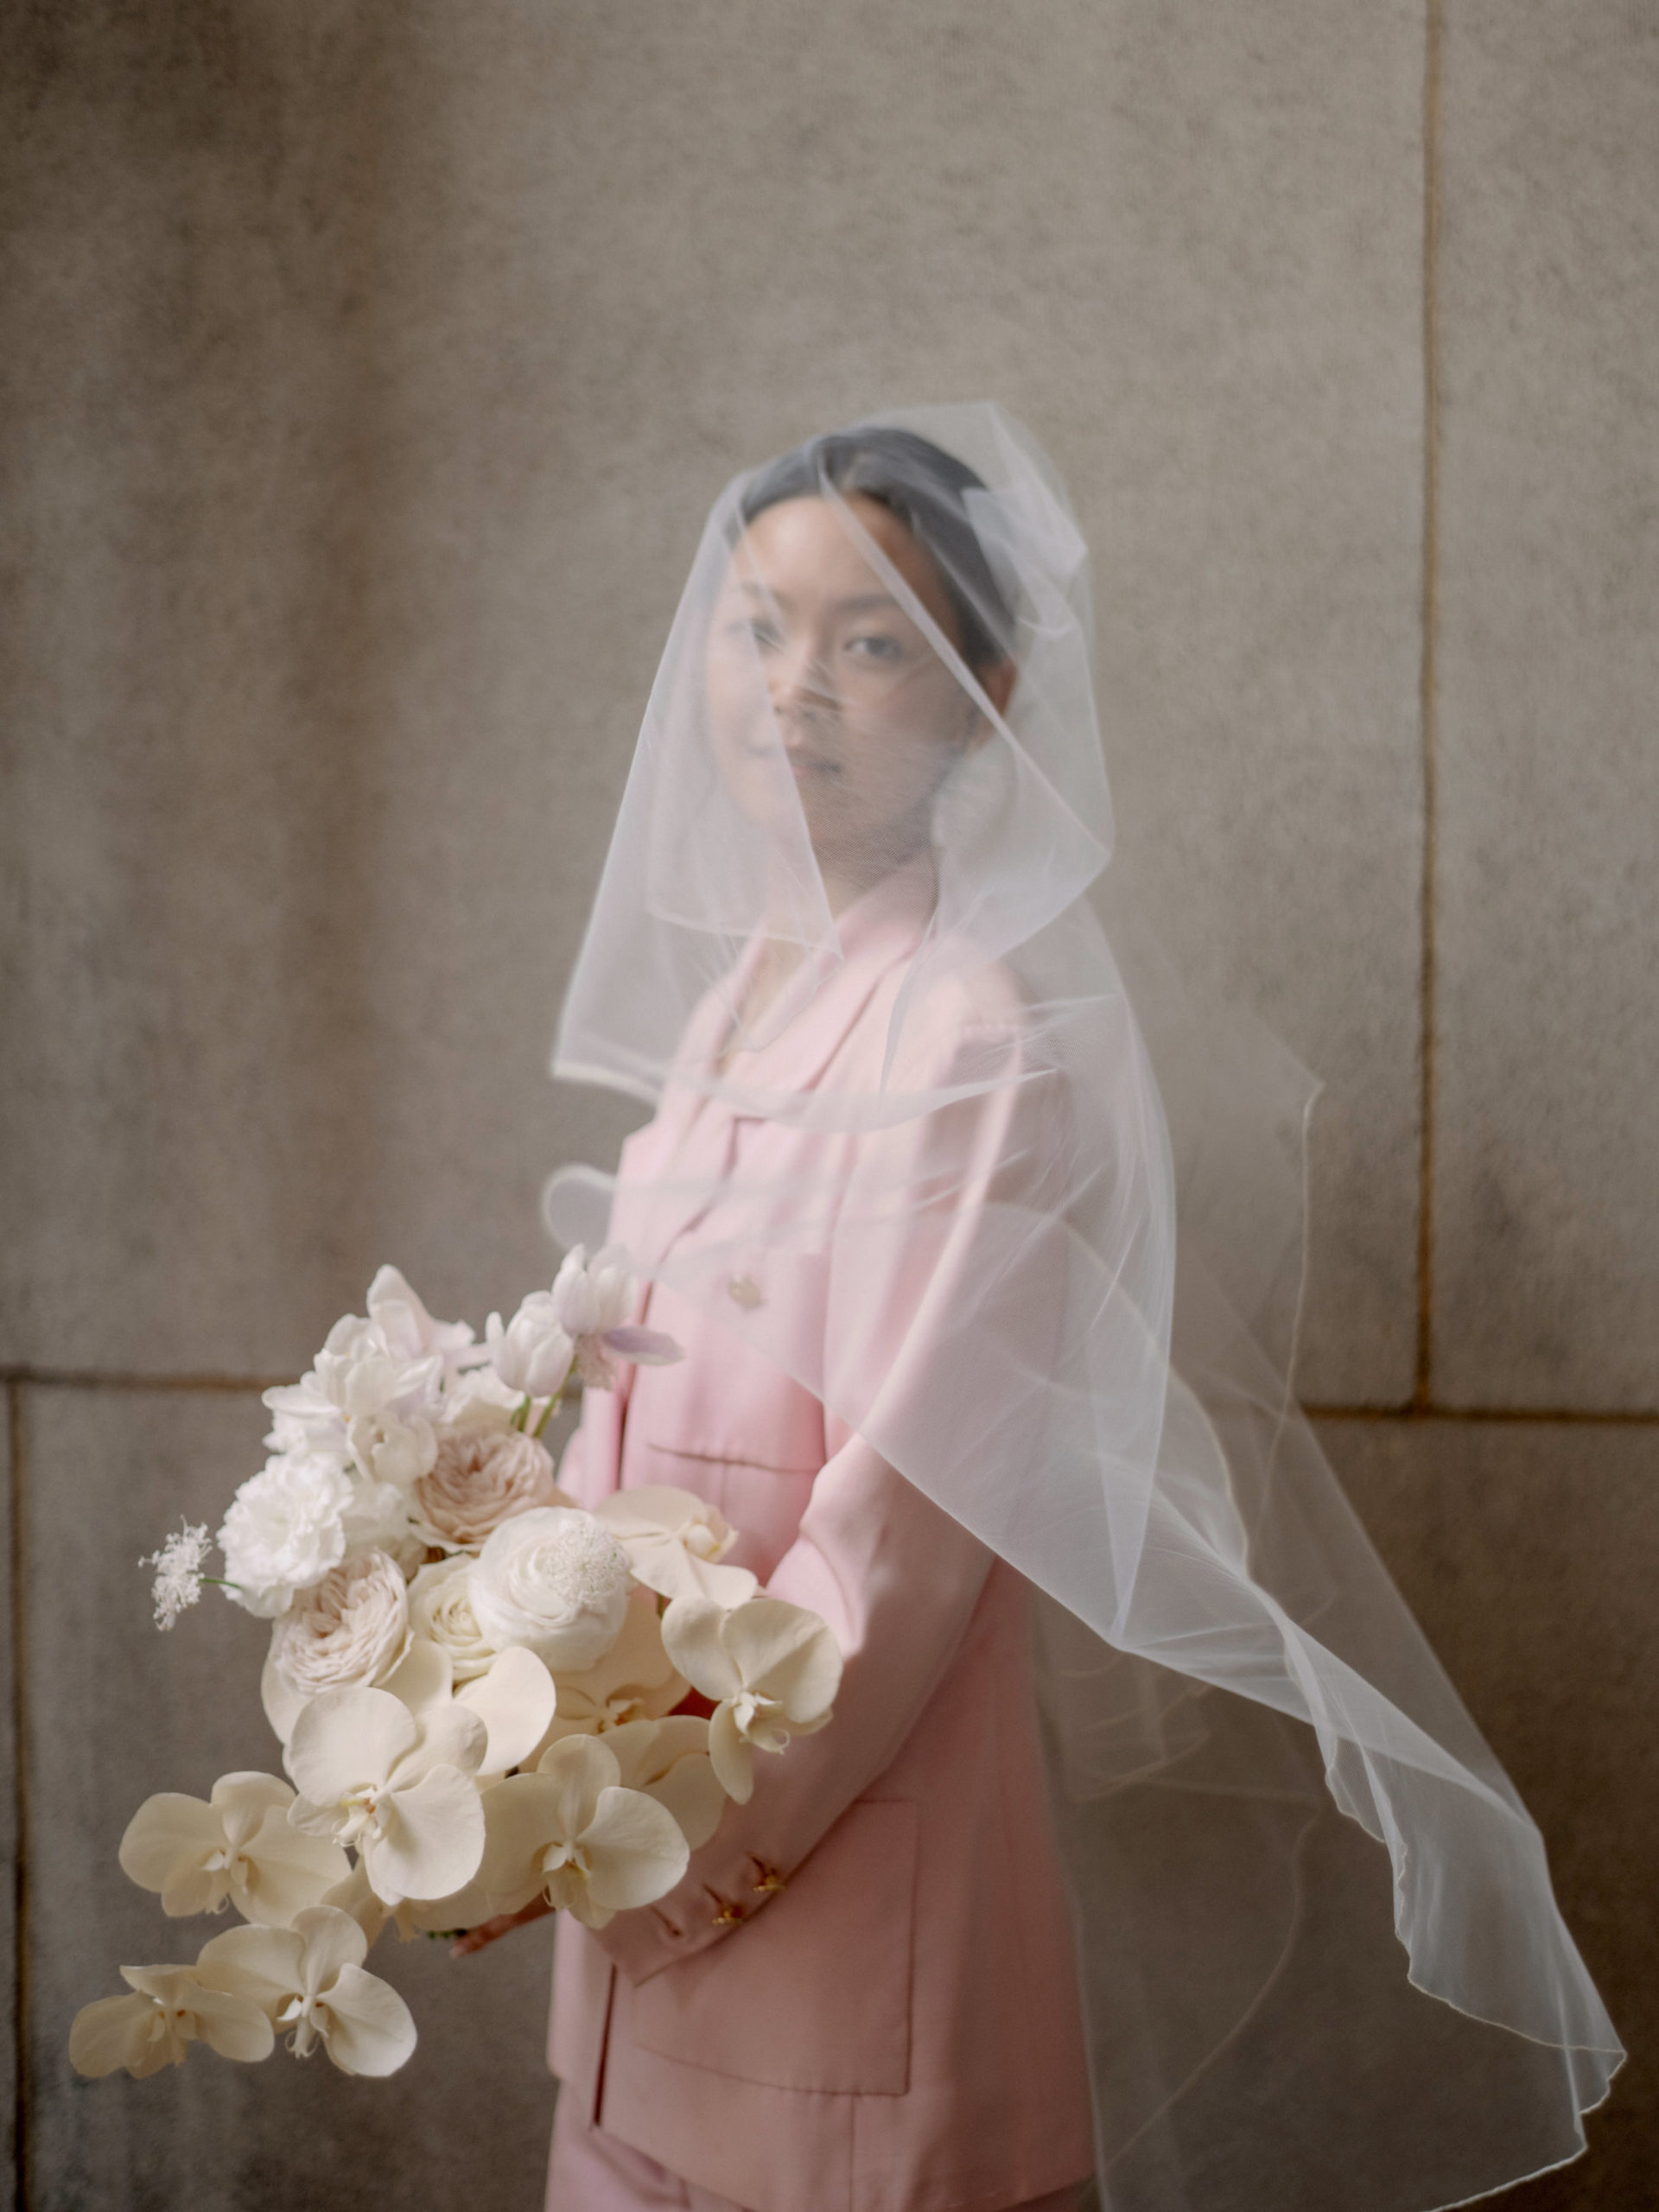 Editorial image of the bride wearing her veil and holding her flower bouquet. Personalized NYC City Hall wedding image by Jenny Fu Studio